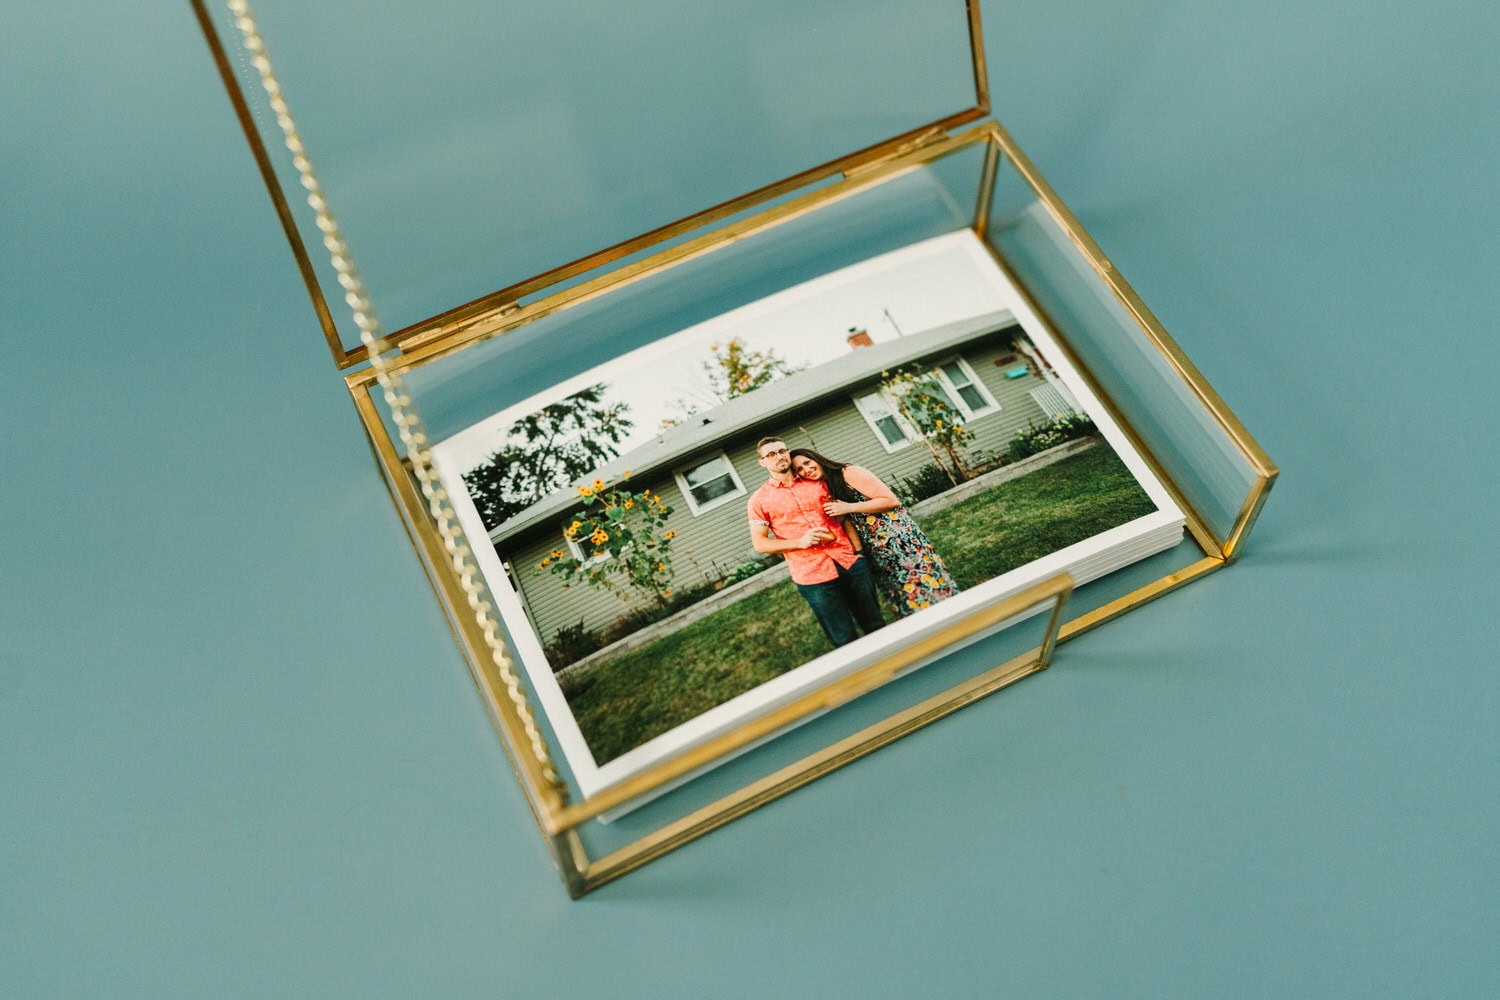 A stack of photo prints inside of a glass box with gold trim